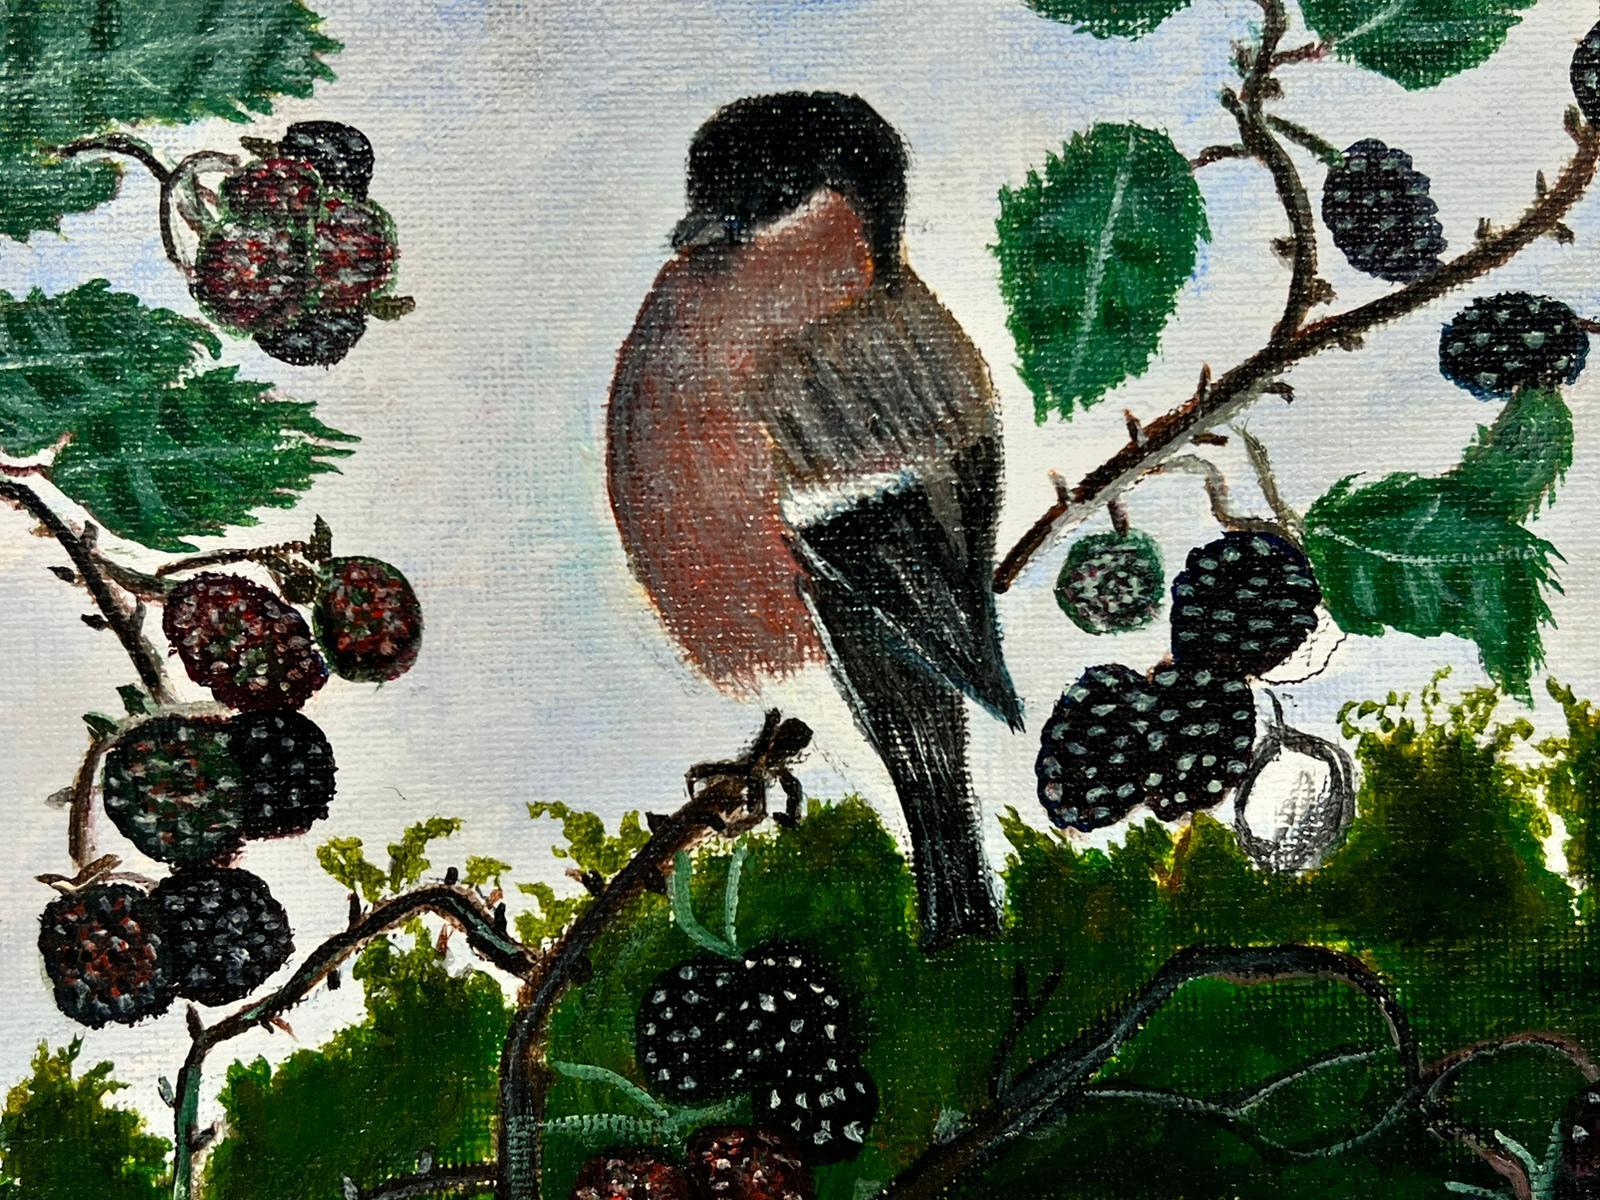 Birds In Blackberry Bush
by Ben George Powell, British contemporary artist
signed
acrylic on board, unframed
board: 10 x 12 inches
provenance: private collection of this artists work, UK
The painting is in very good and presentable condition.
